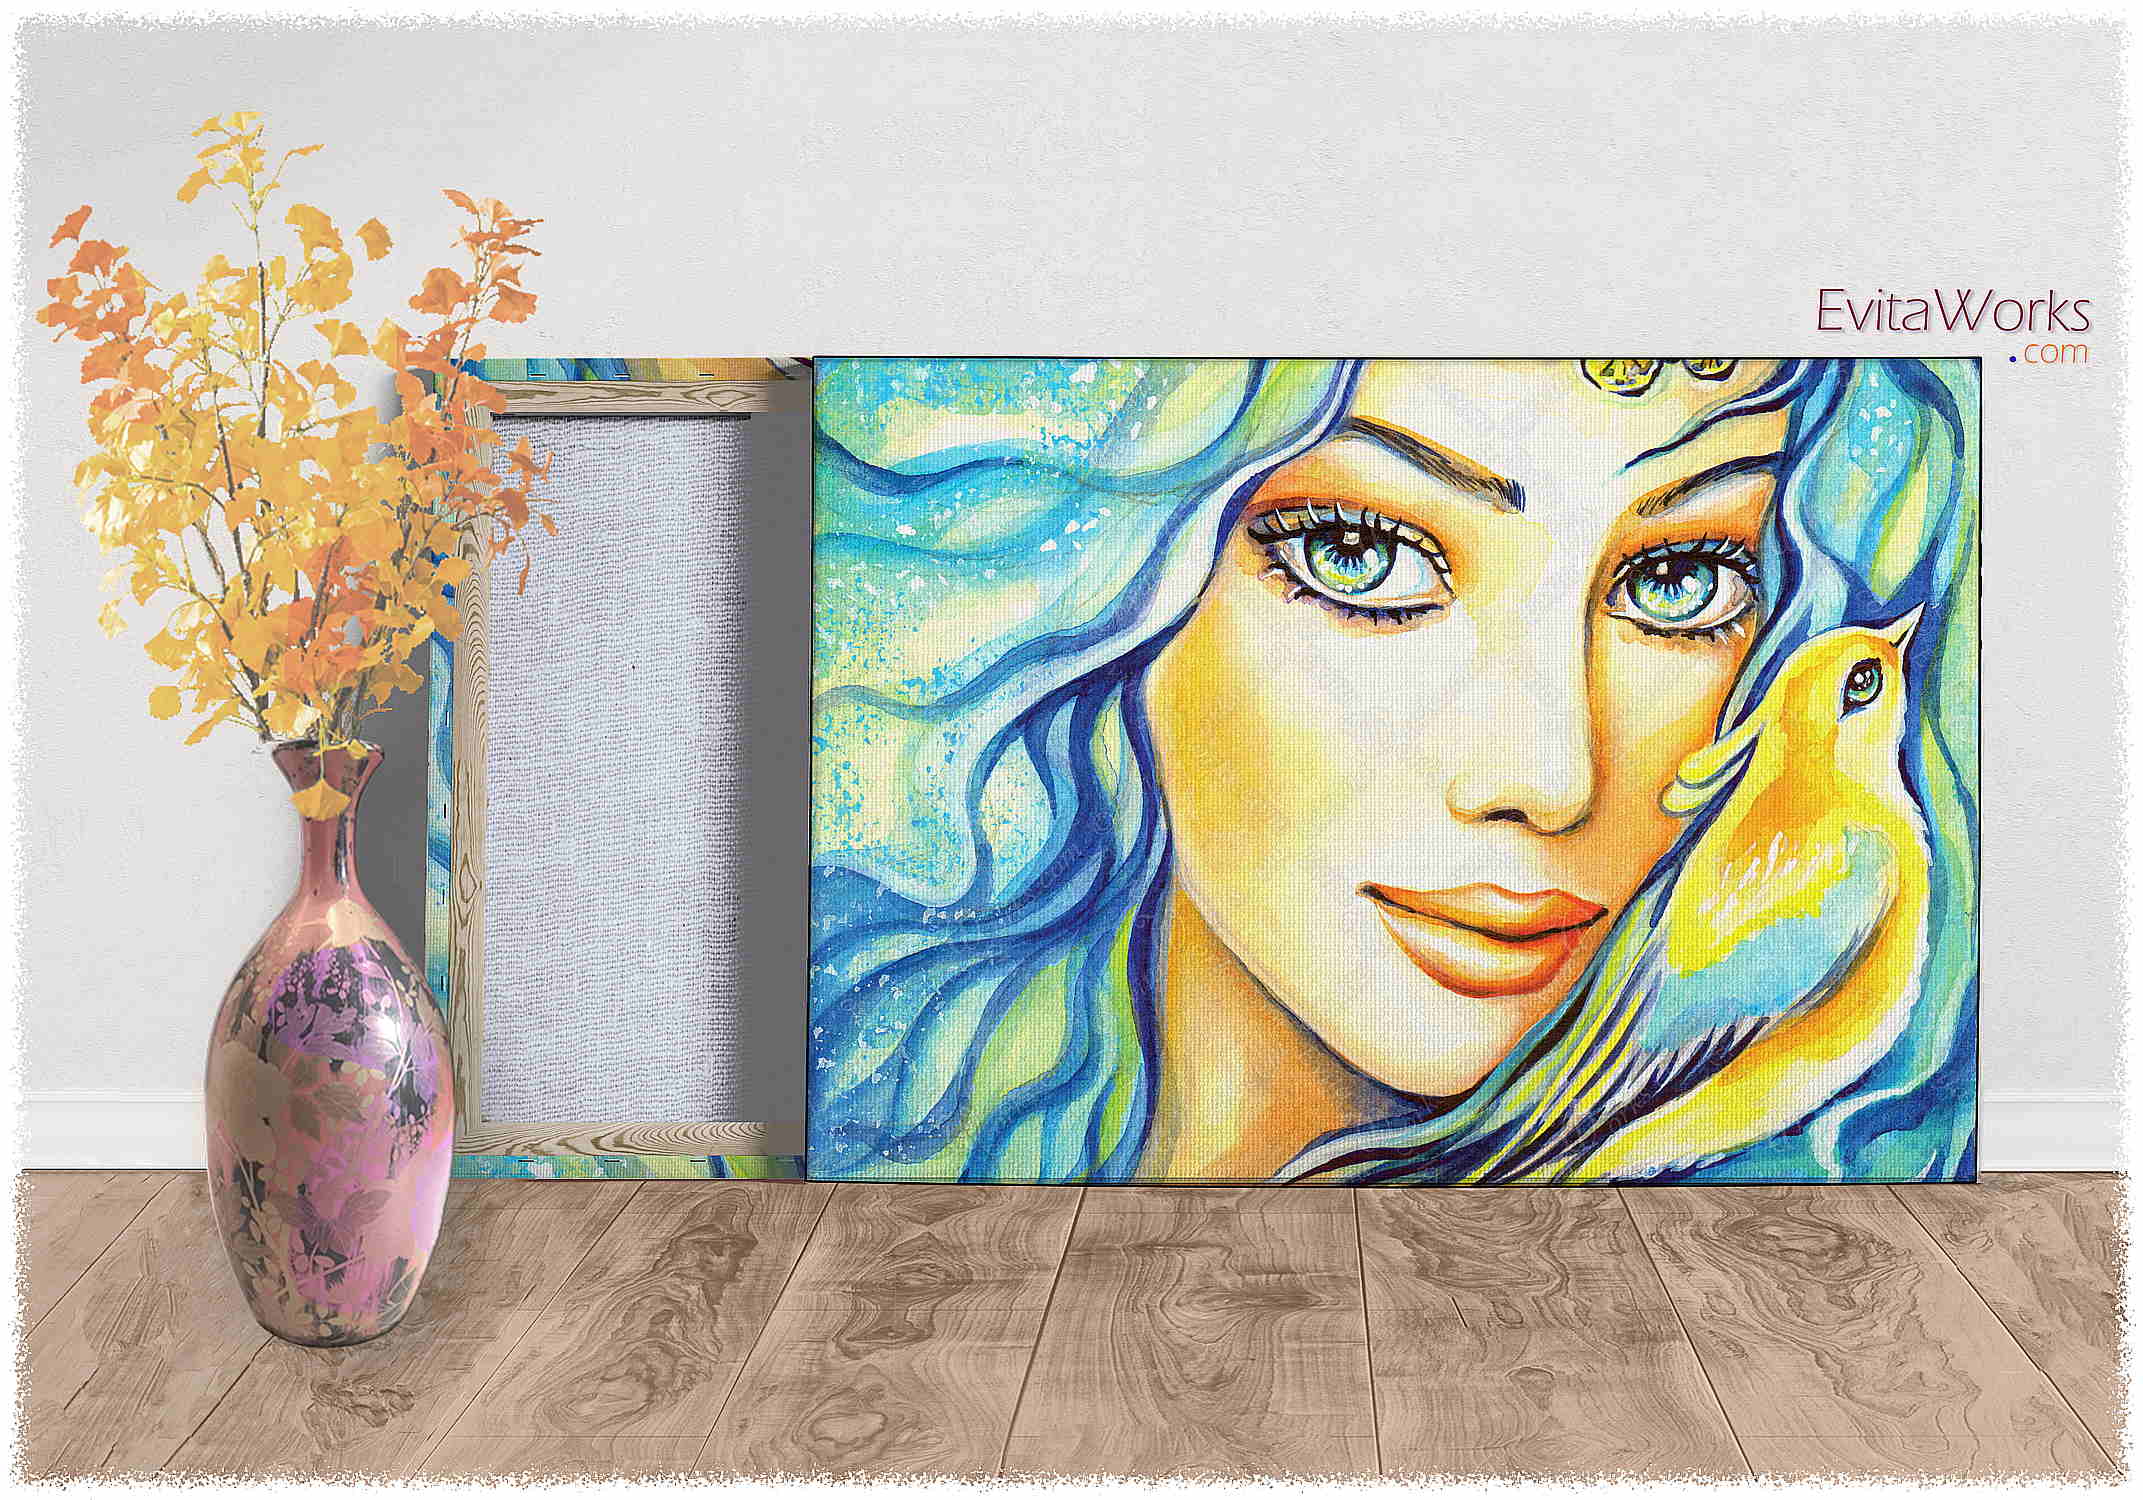 Hit to learn about "Bird of Secrets, fairy, beautiful mythical face" on canvases